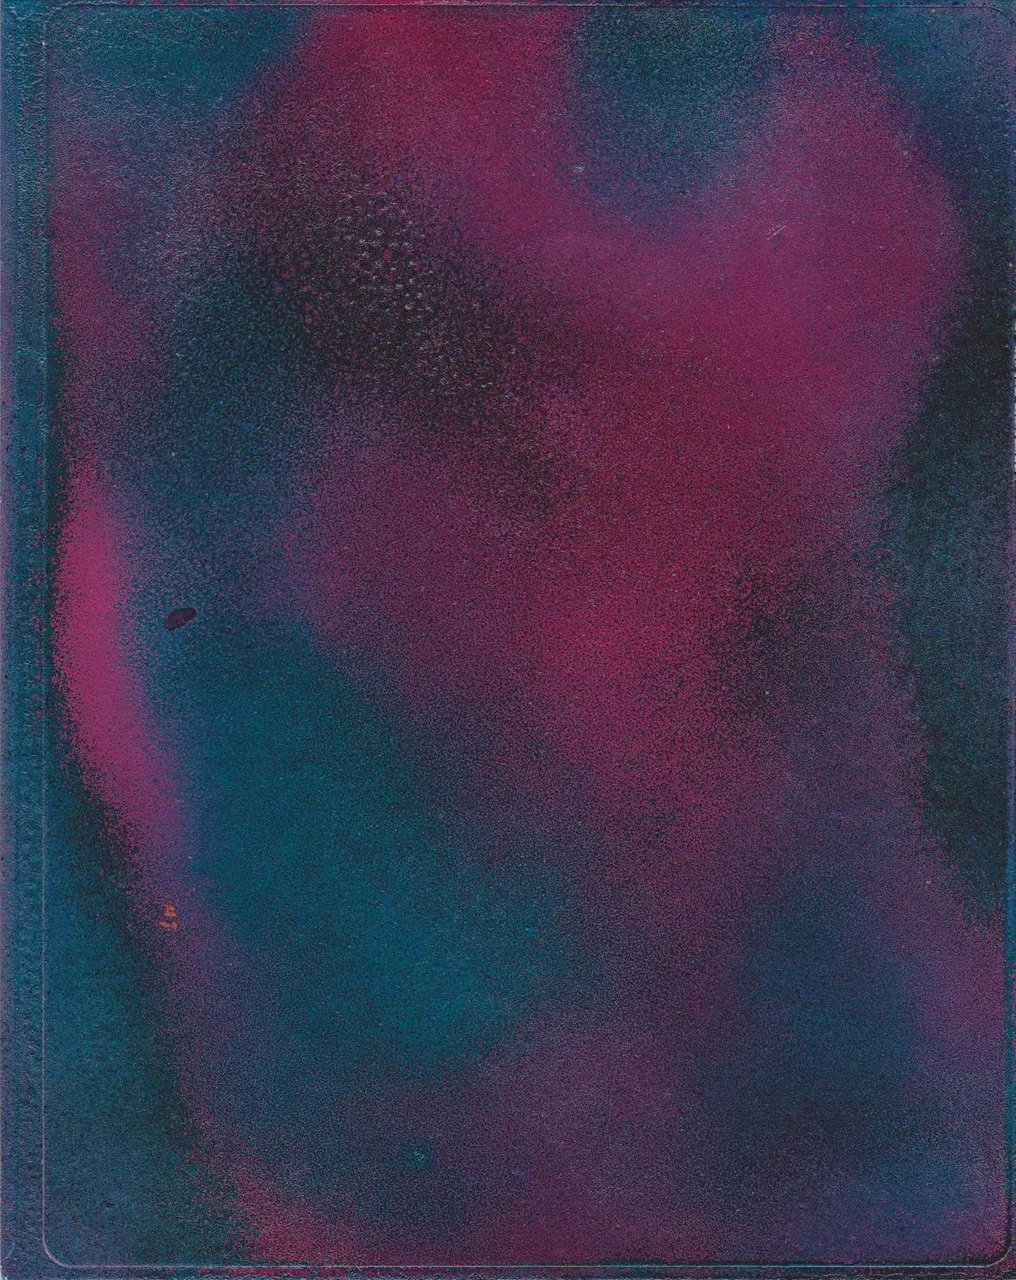 untitled_2_abstract_spray_painting_4x5_3_4_inch_sticker_paper.jpeg